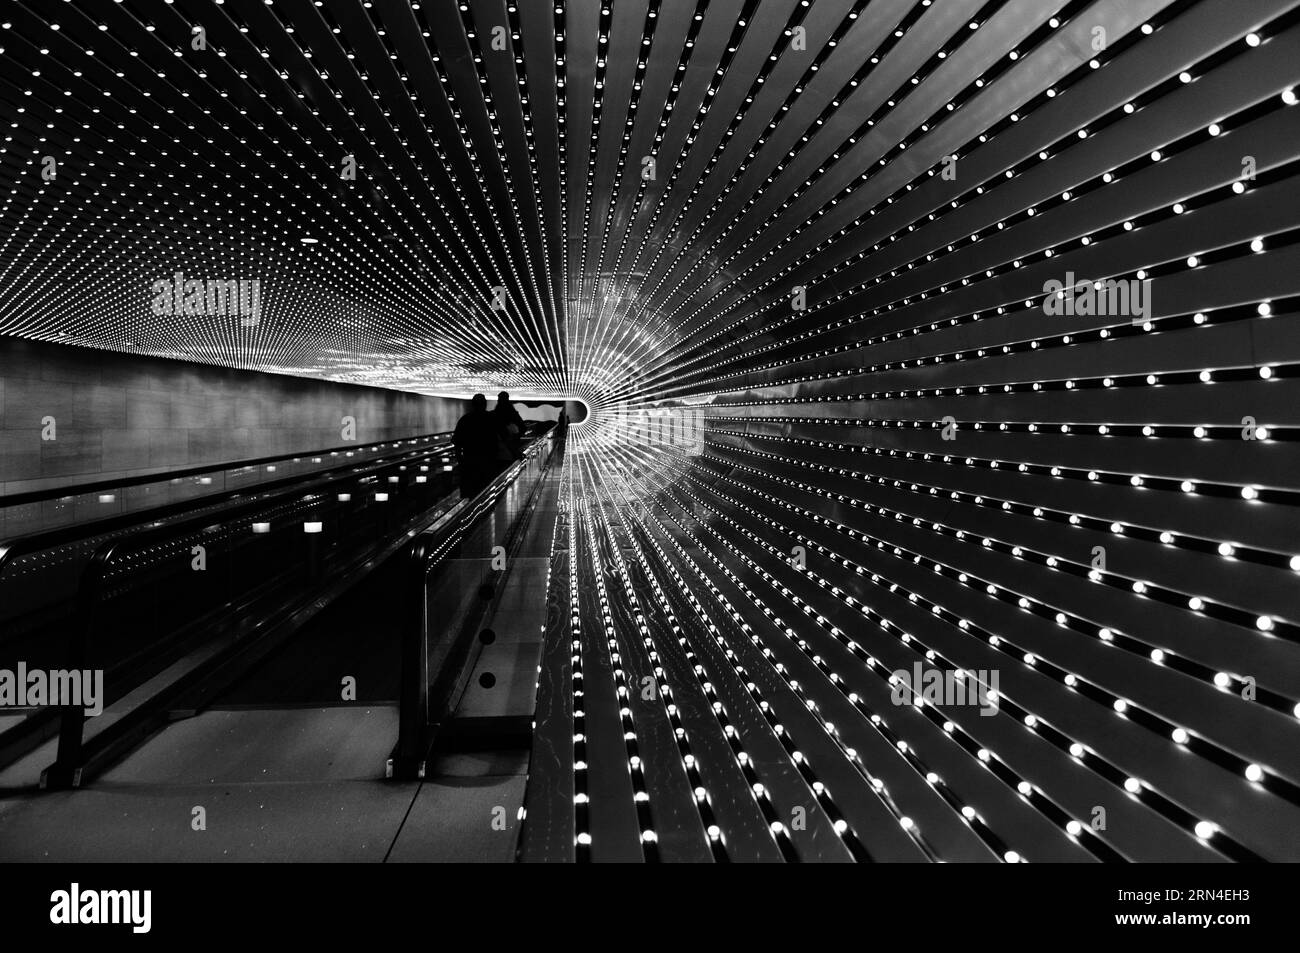 WASHINGTON DC, USA - An LED light installation by American artist Leo Villareal titled Multiverse (2008) connecting the old and new buildings of the National Gallery of Art in Washington DC.The thousands of individual lights are programmed to move in a display as the pedestrians move along the walkway. Stock Photo